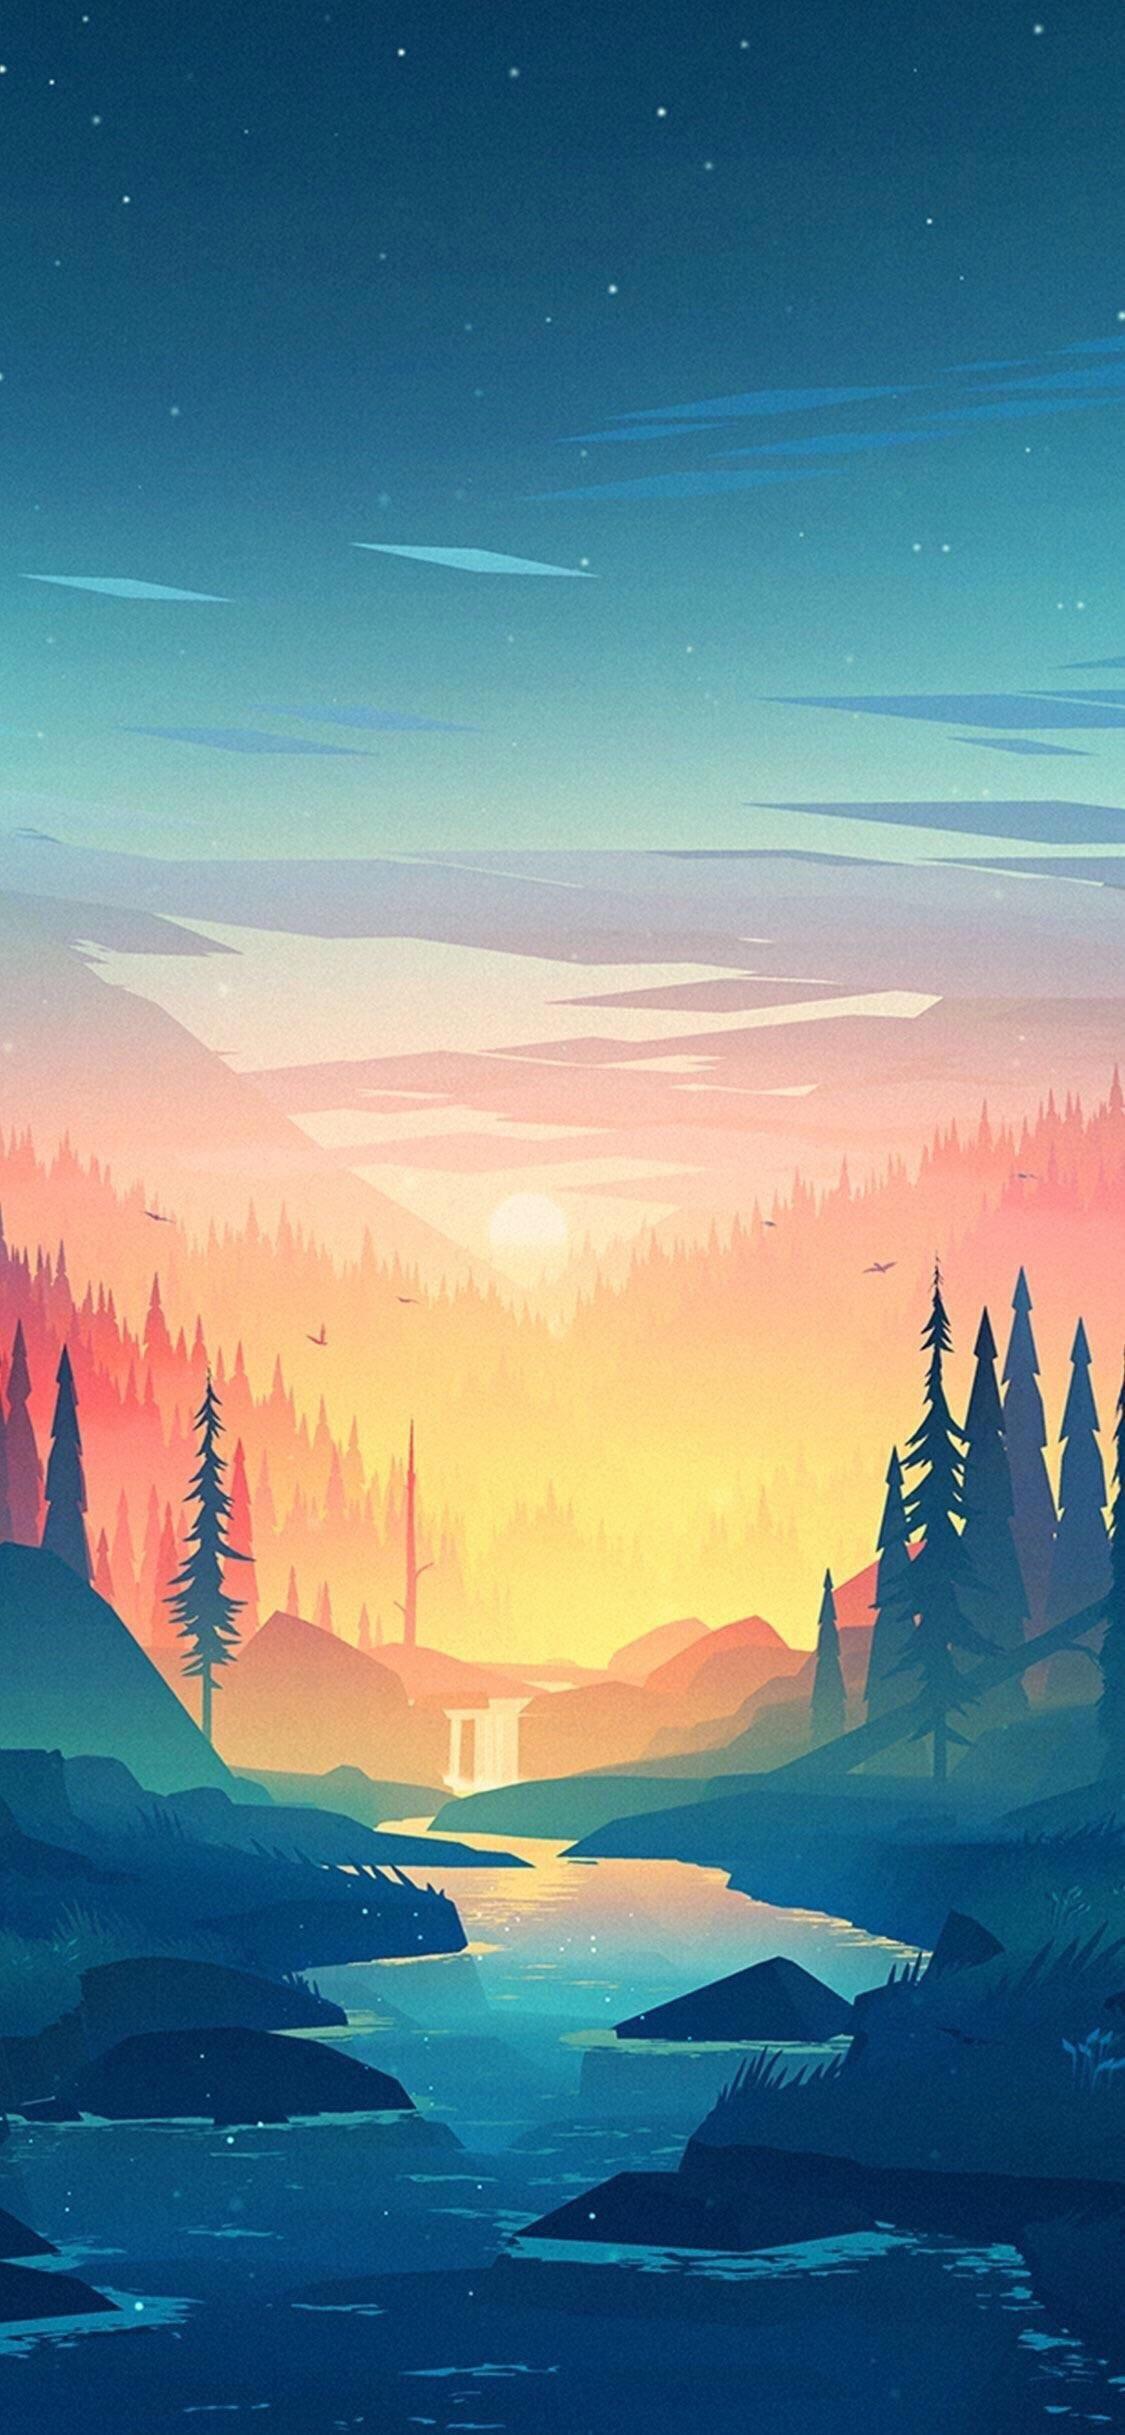 Seen this wallpaper in multiple MKBHD videos and looks awesome on